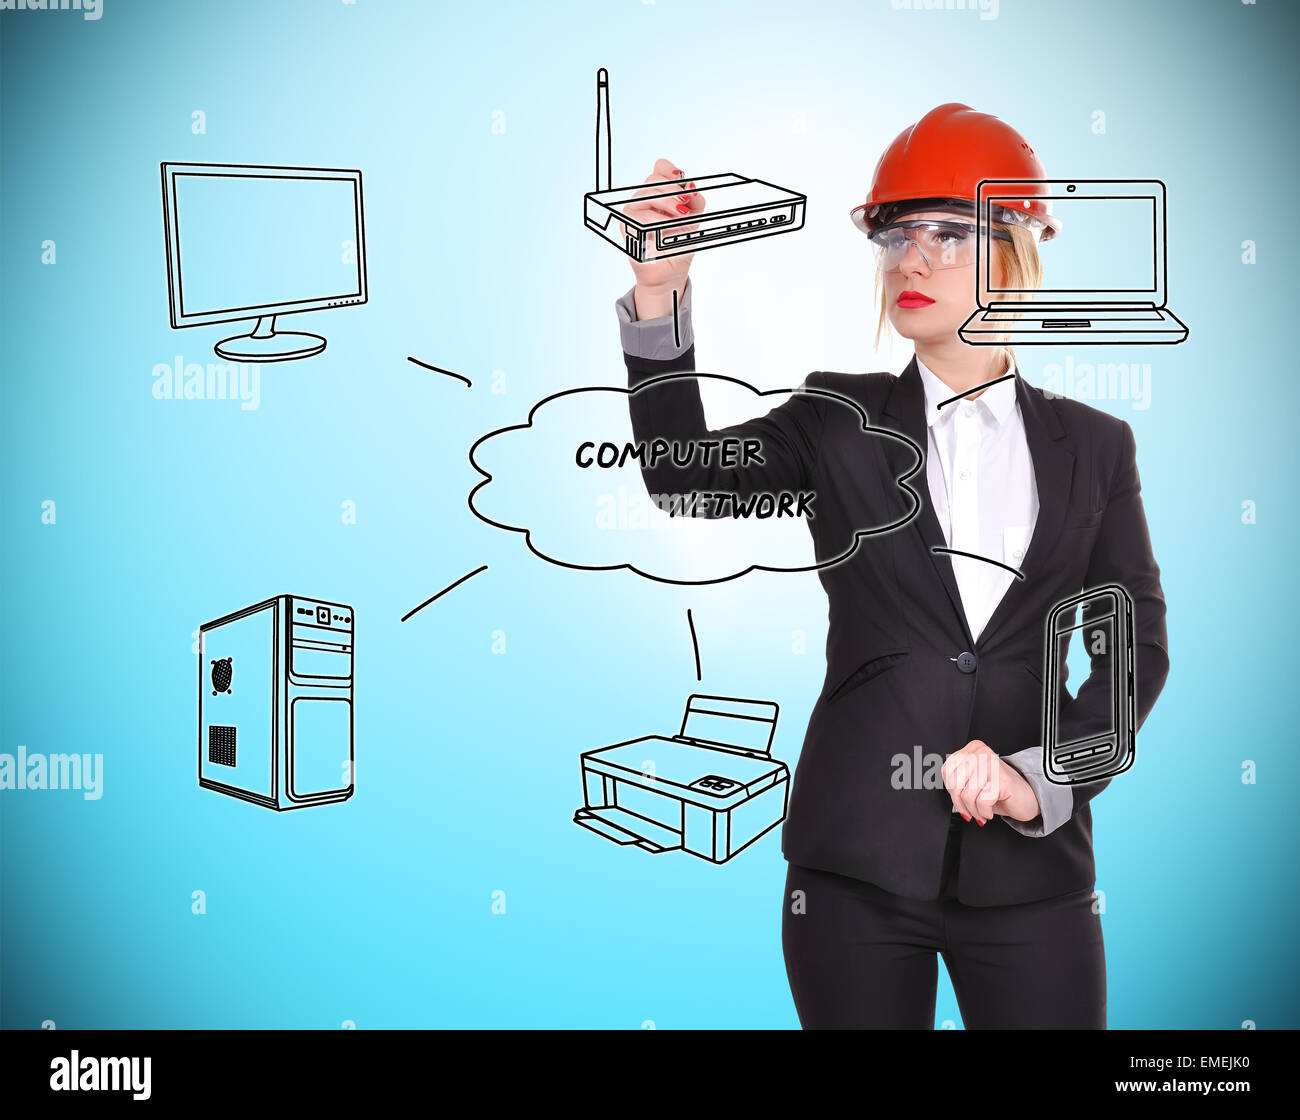 engineer woman drawing computer network on blue background Stock Photo